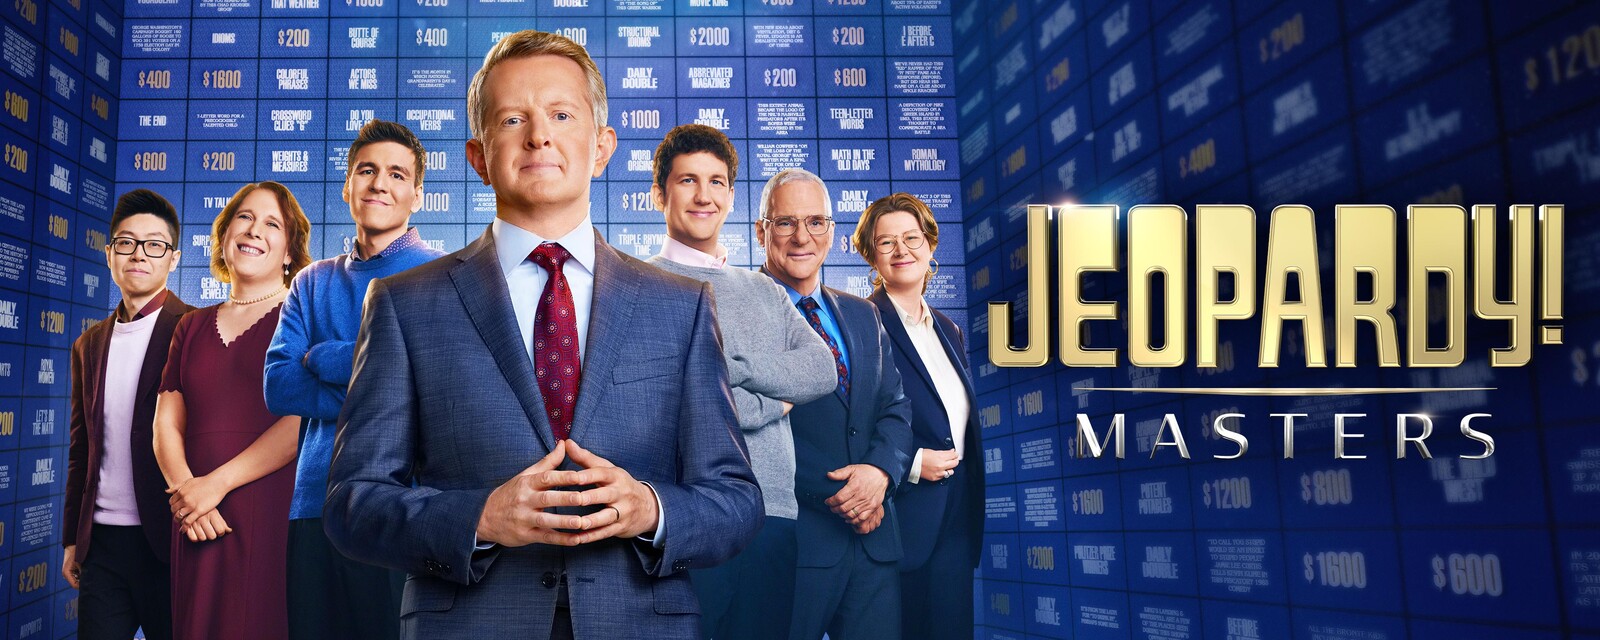 ABC Unveils the Primetime Schedule for "Jeopardy! Masters" Jeopardy